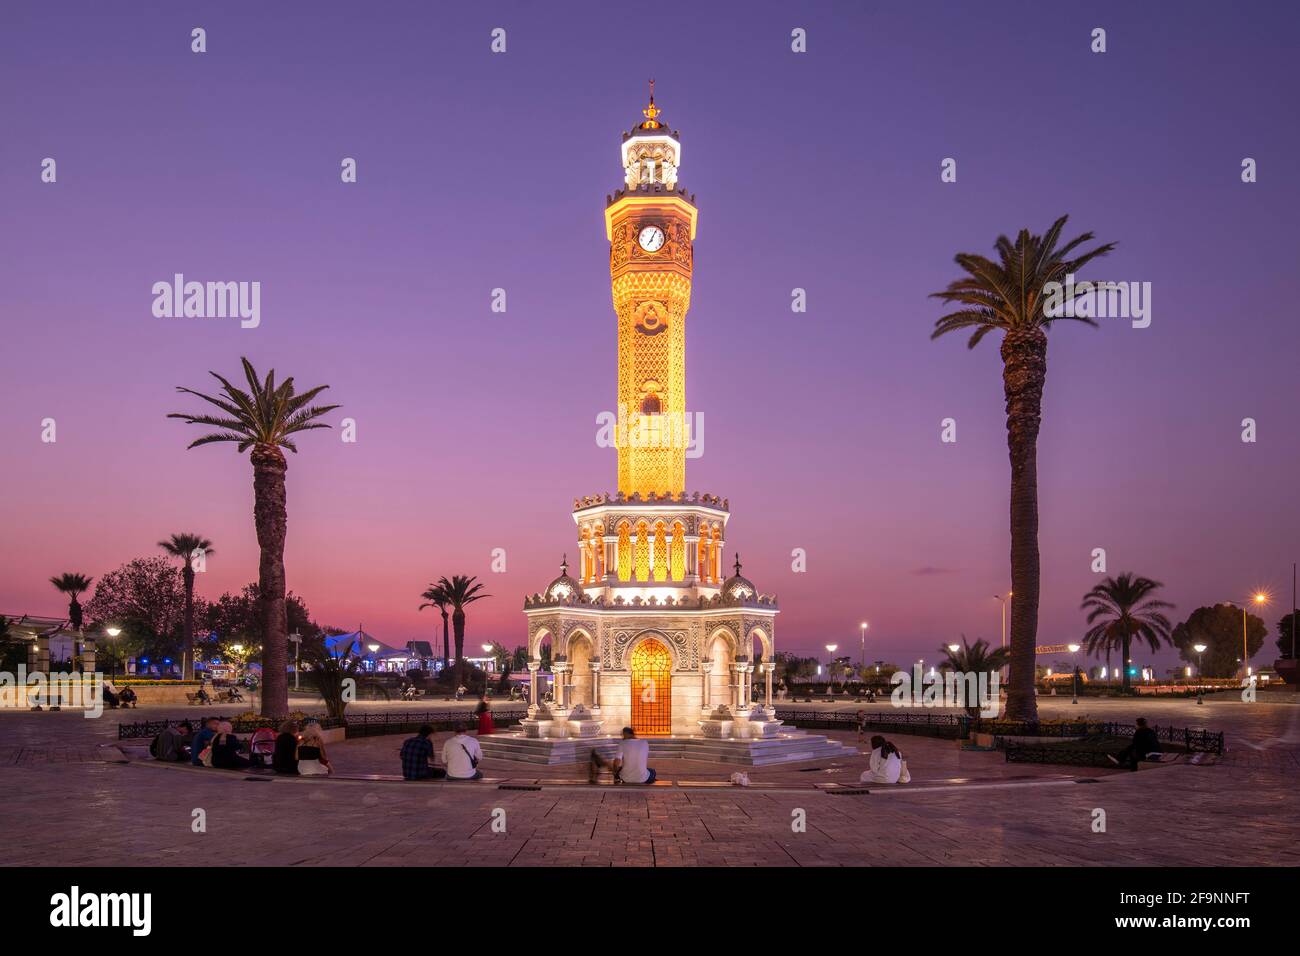 Konak Square street view with old clock tower (Saat Kulesi) at sunset. It was built in 1901 and accepted as the official symbol of Izmir City, Turkey Stock Photo